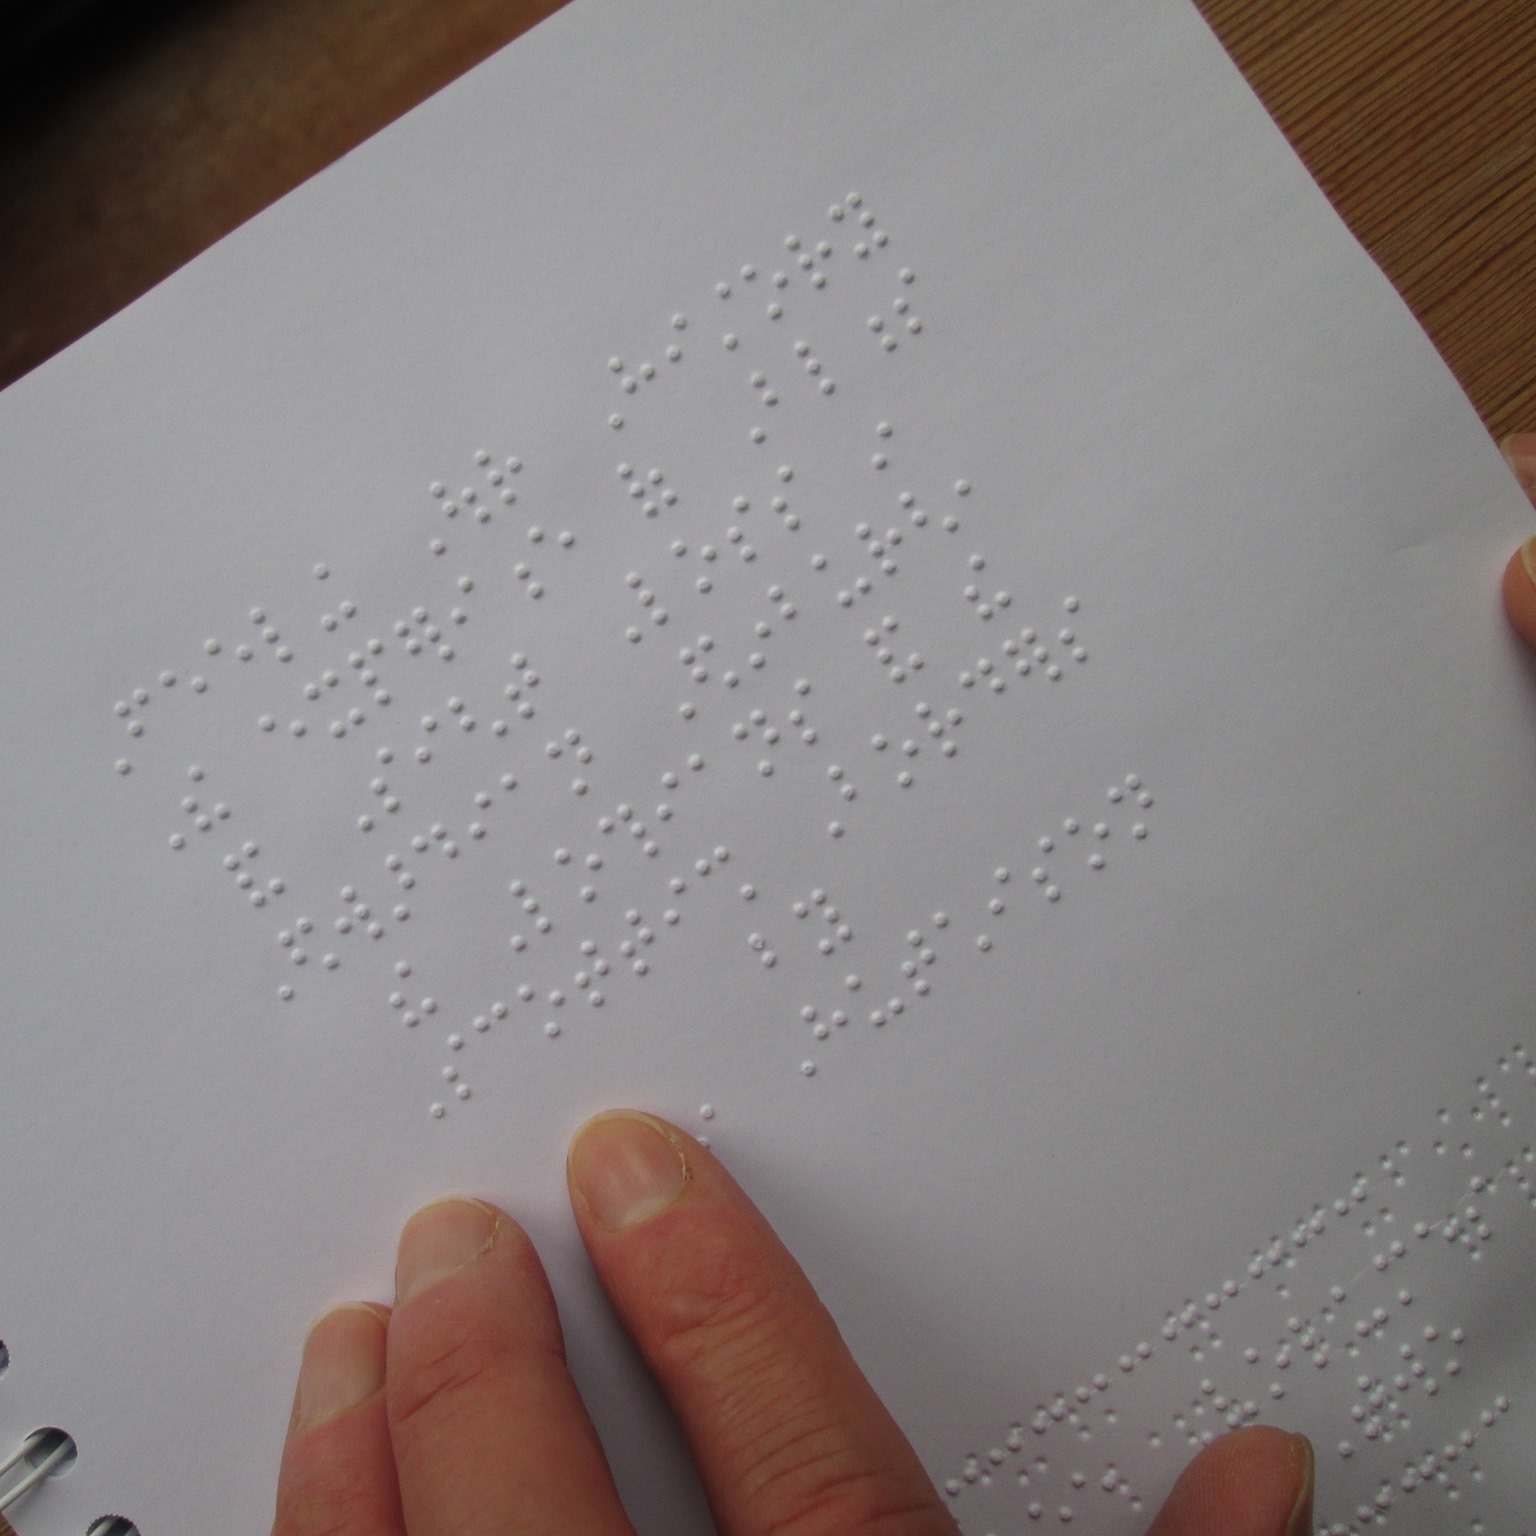 Some fingers reading a page of Braille